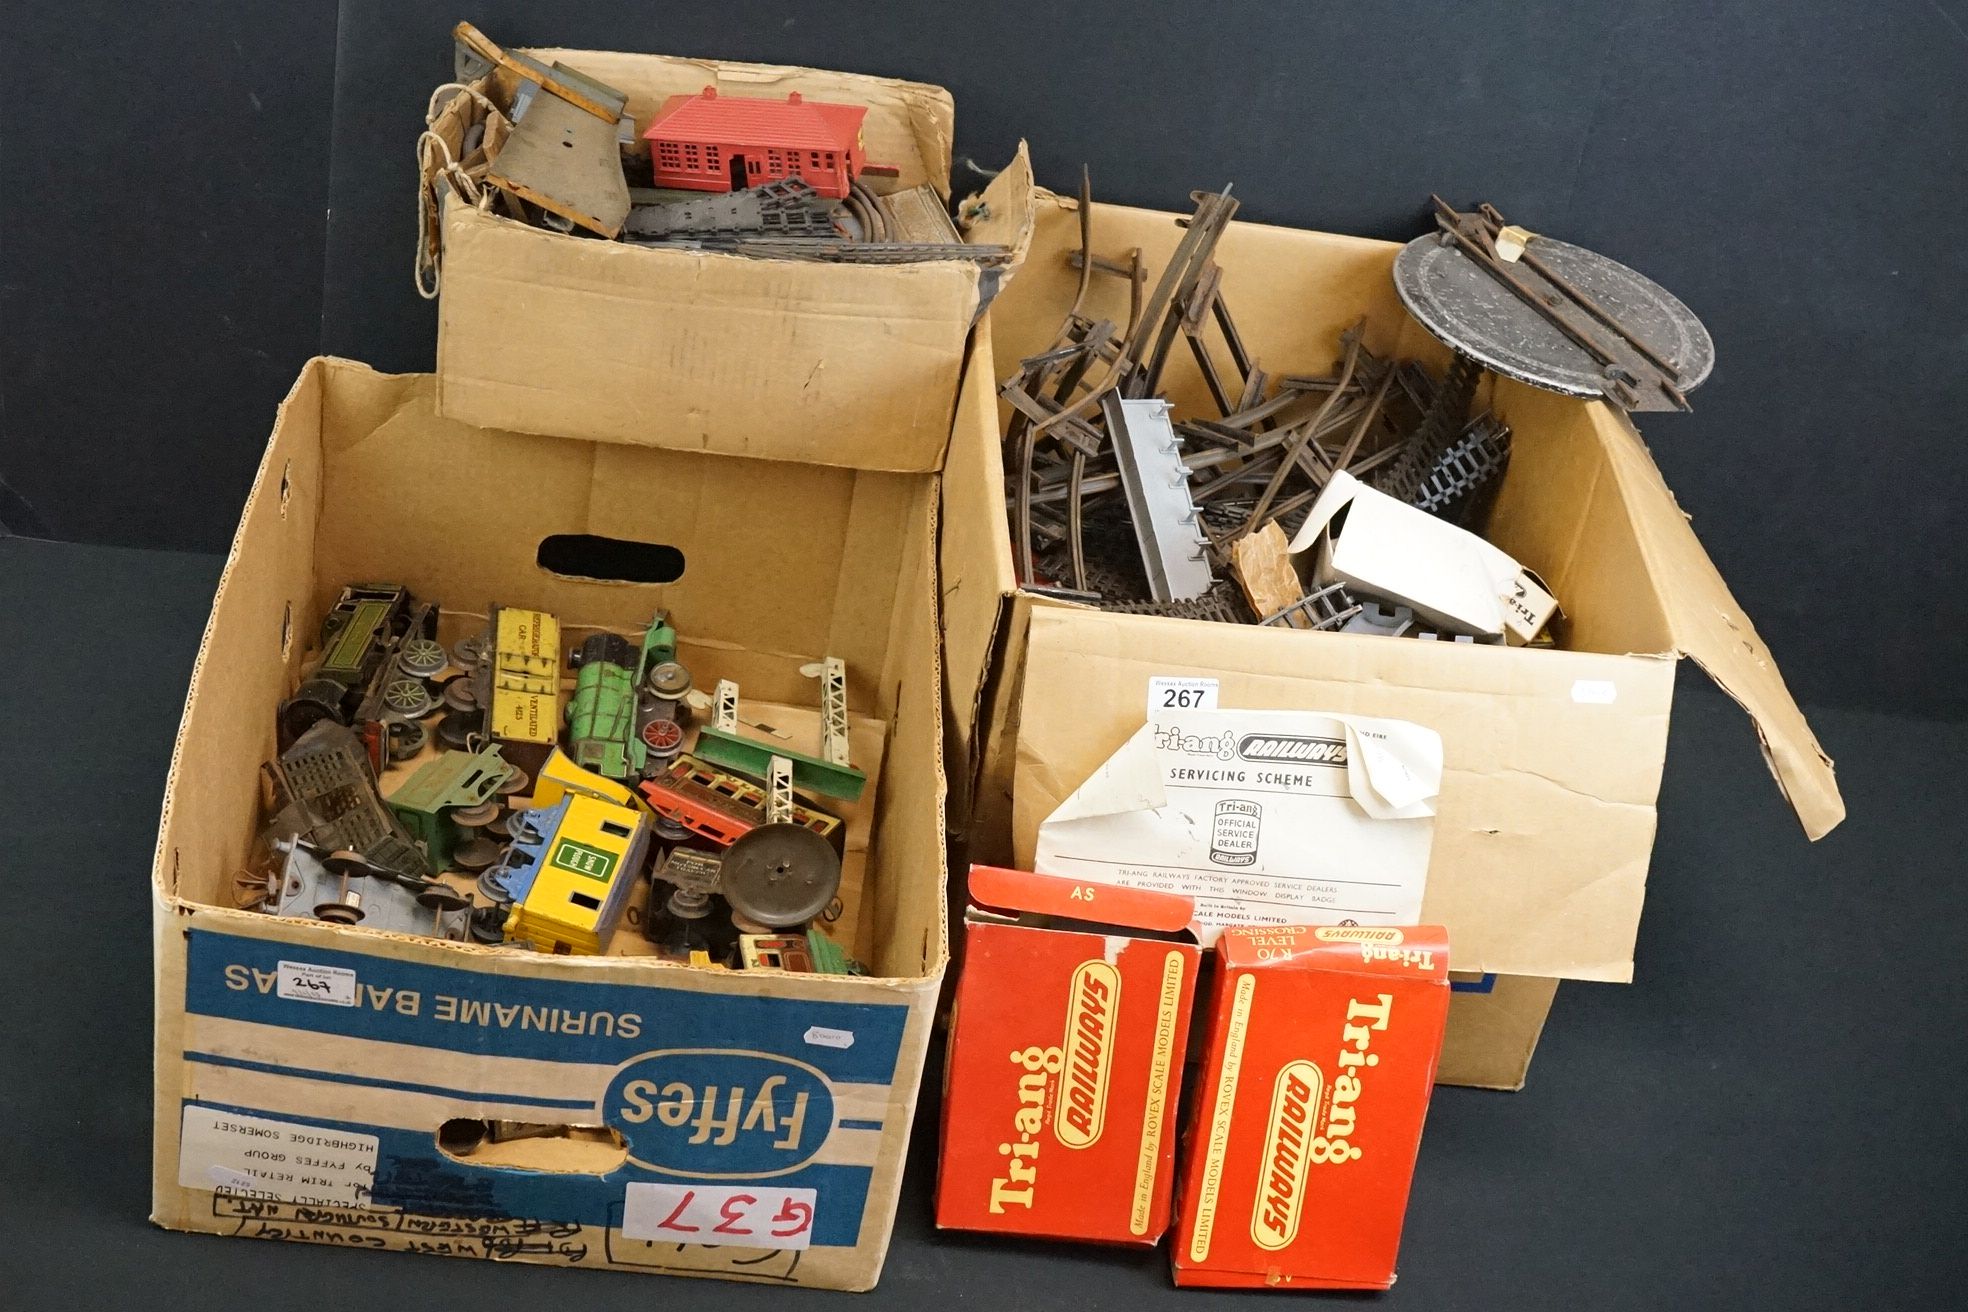 Collection of play worn Hornby O gauge model railway to include 2 x locomotives and 11 x items of